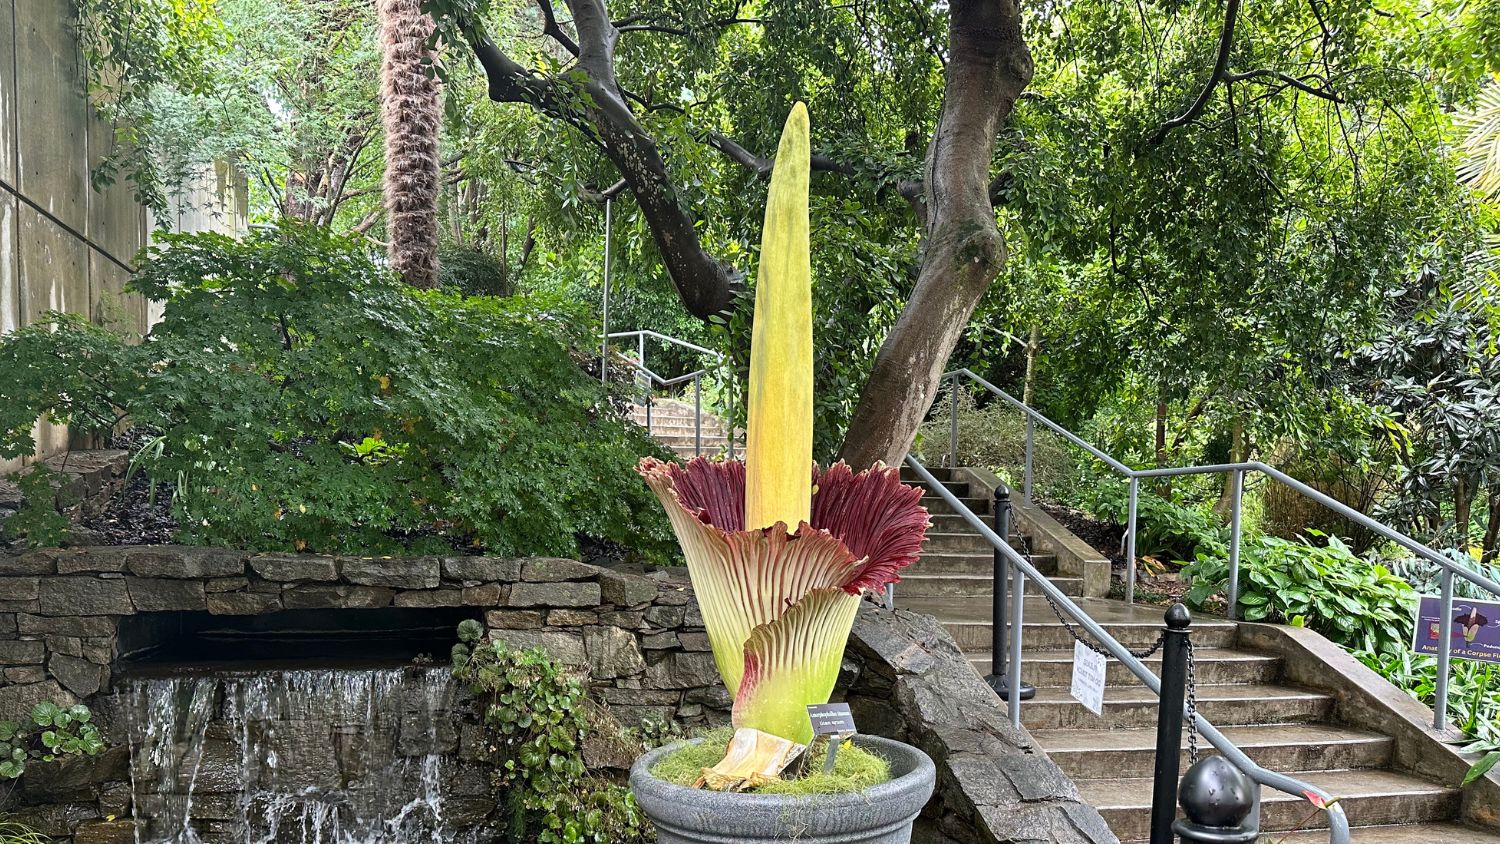 Wolfgang the corpse flower at the JC Raulston Arboretum